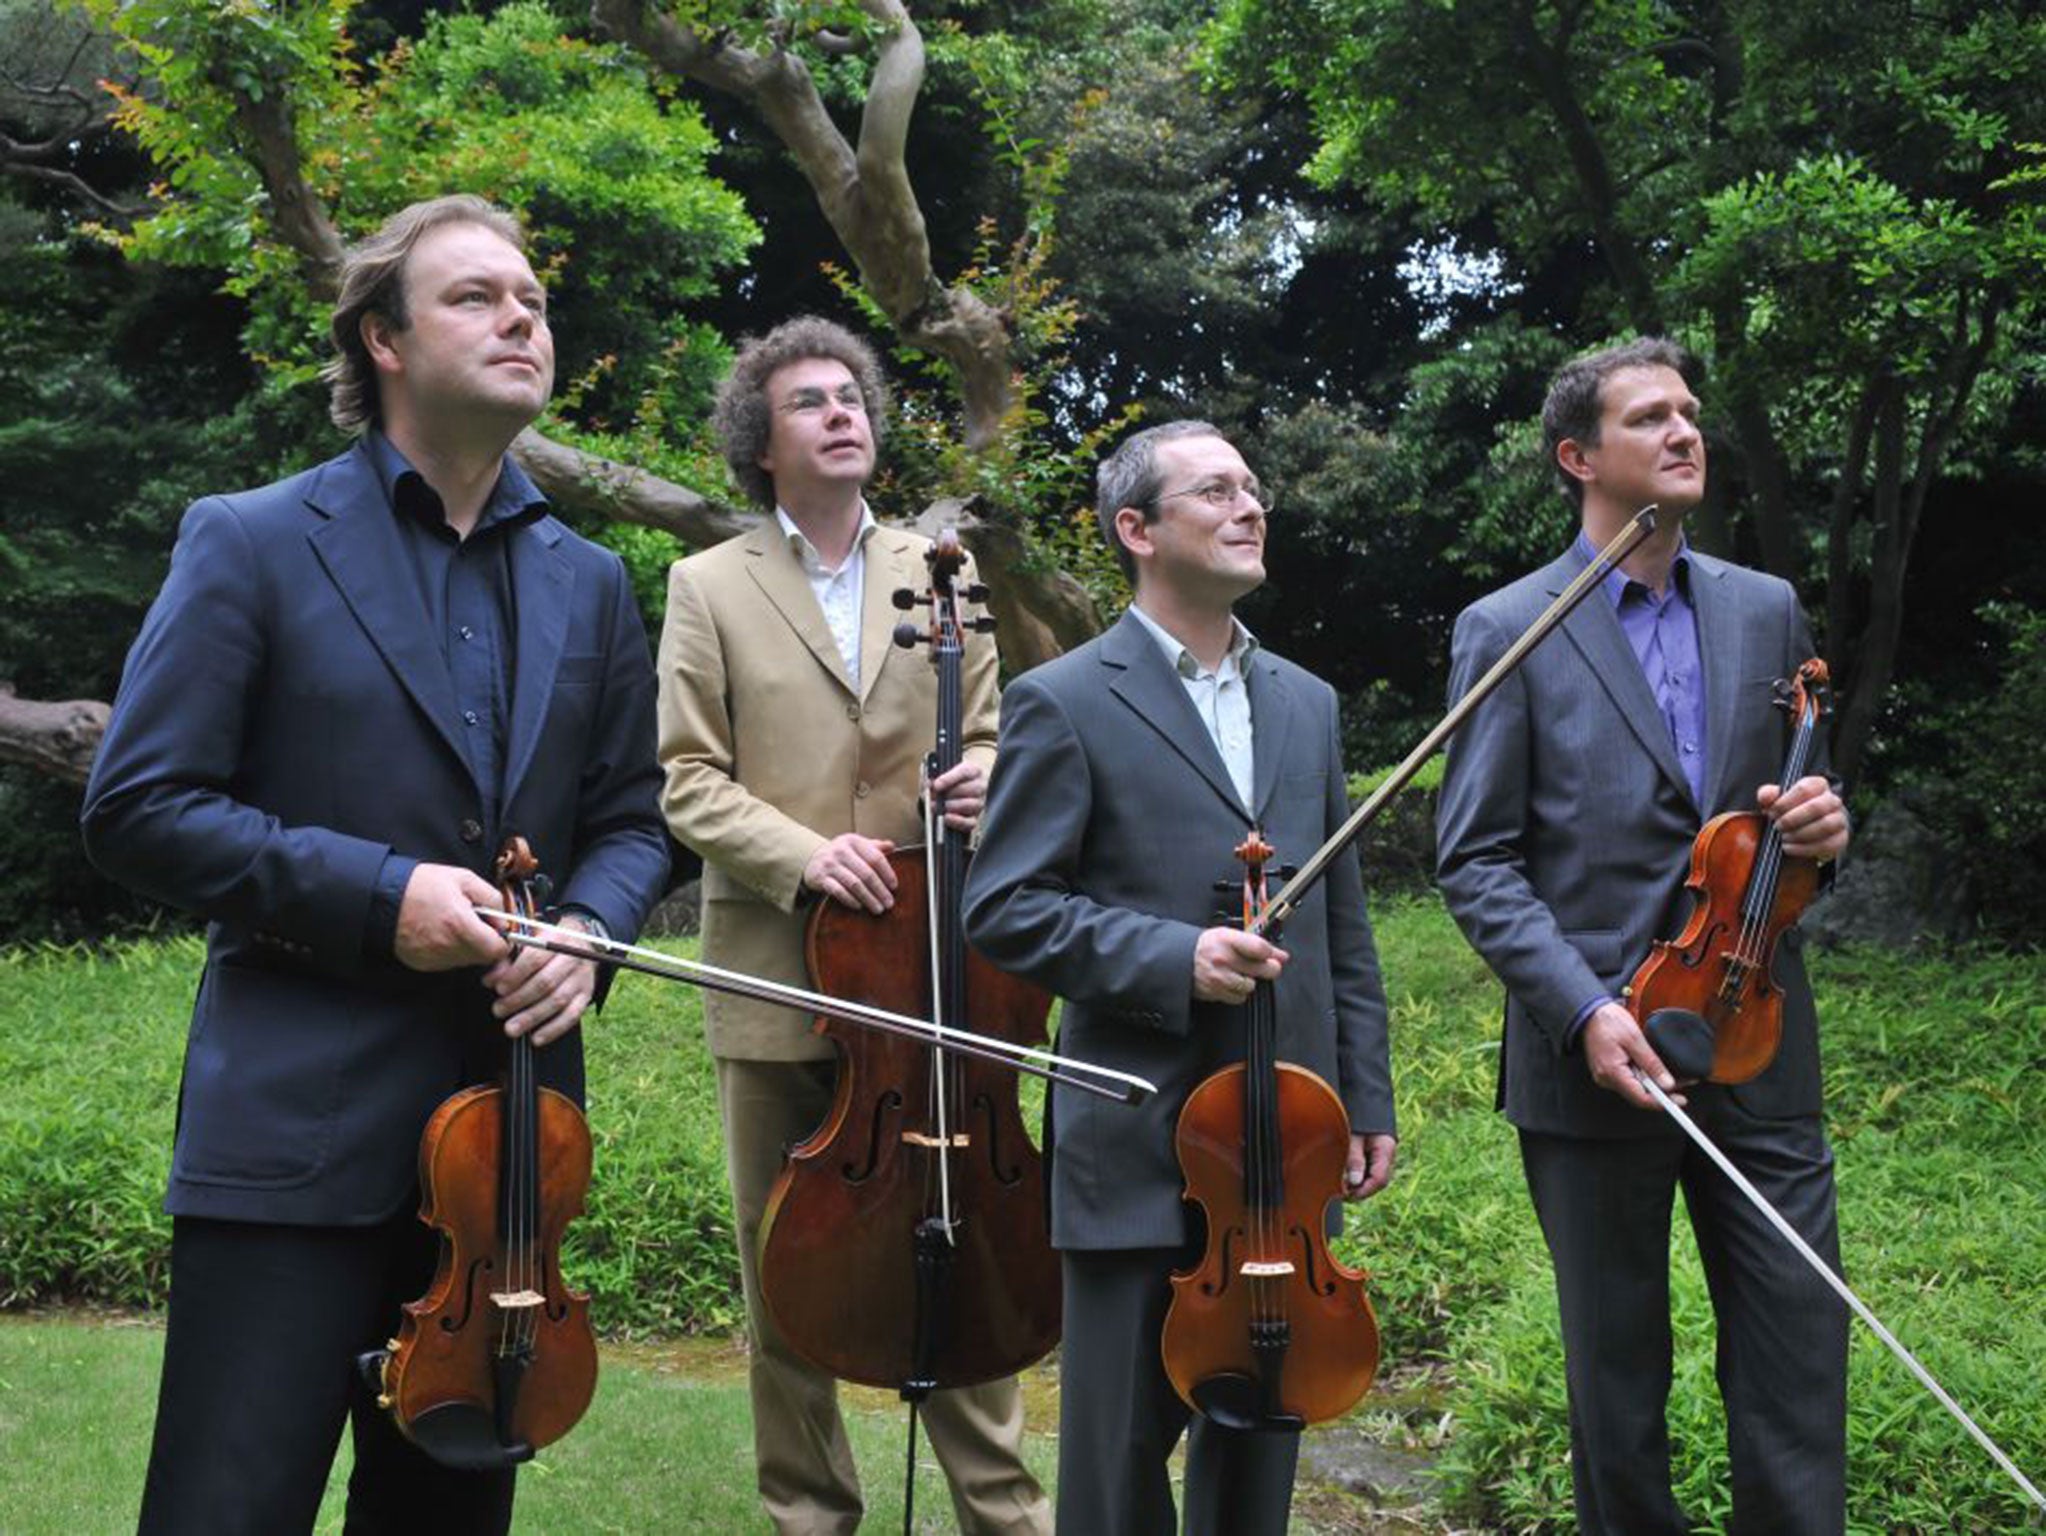 Stefan Arzberger (far right), of the Leipzig String Quartet, claims he was poisoned by a transsexual prostitute in New York